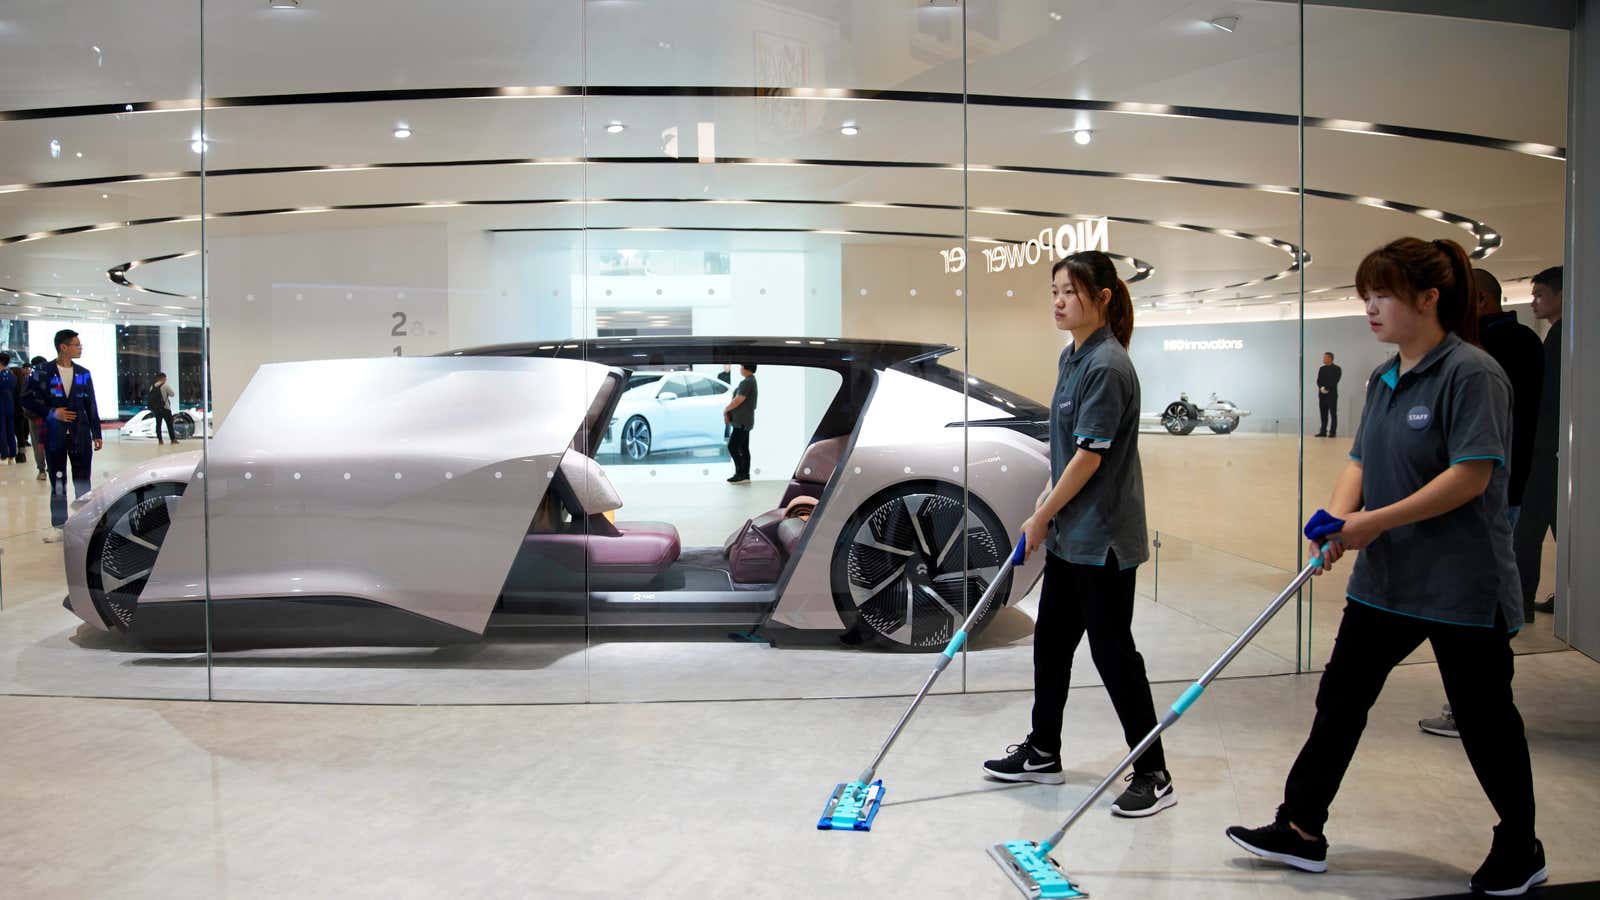 NIO’s self-driving electric concept car displayed at Shanghai auto show in 2019.